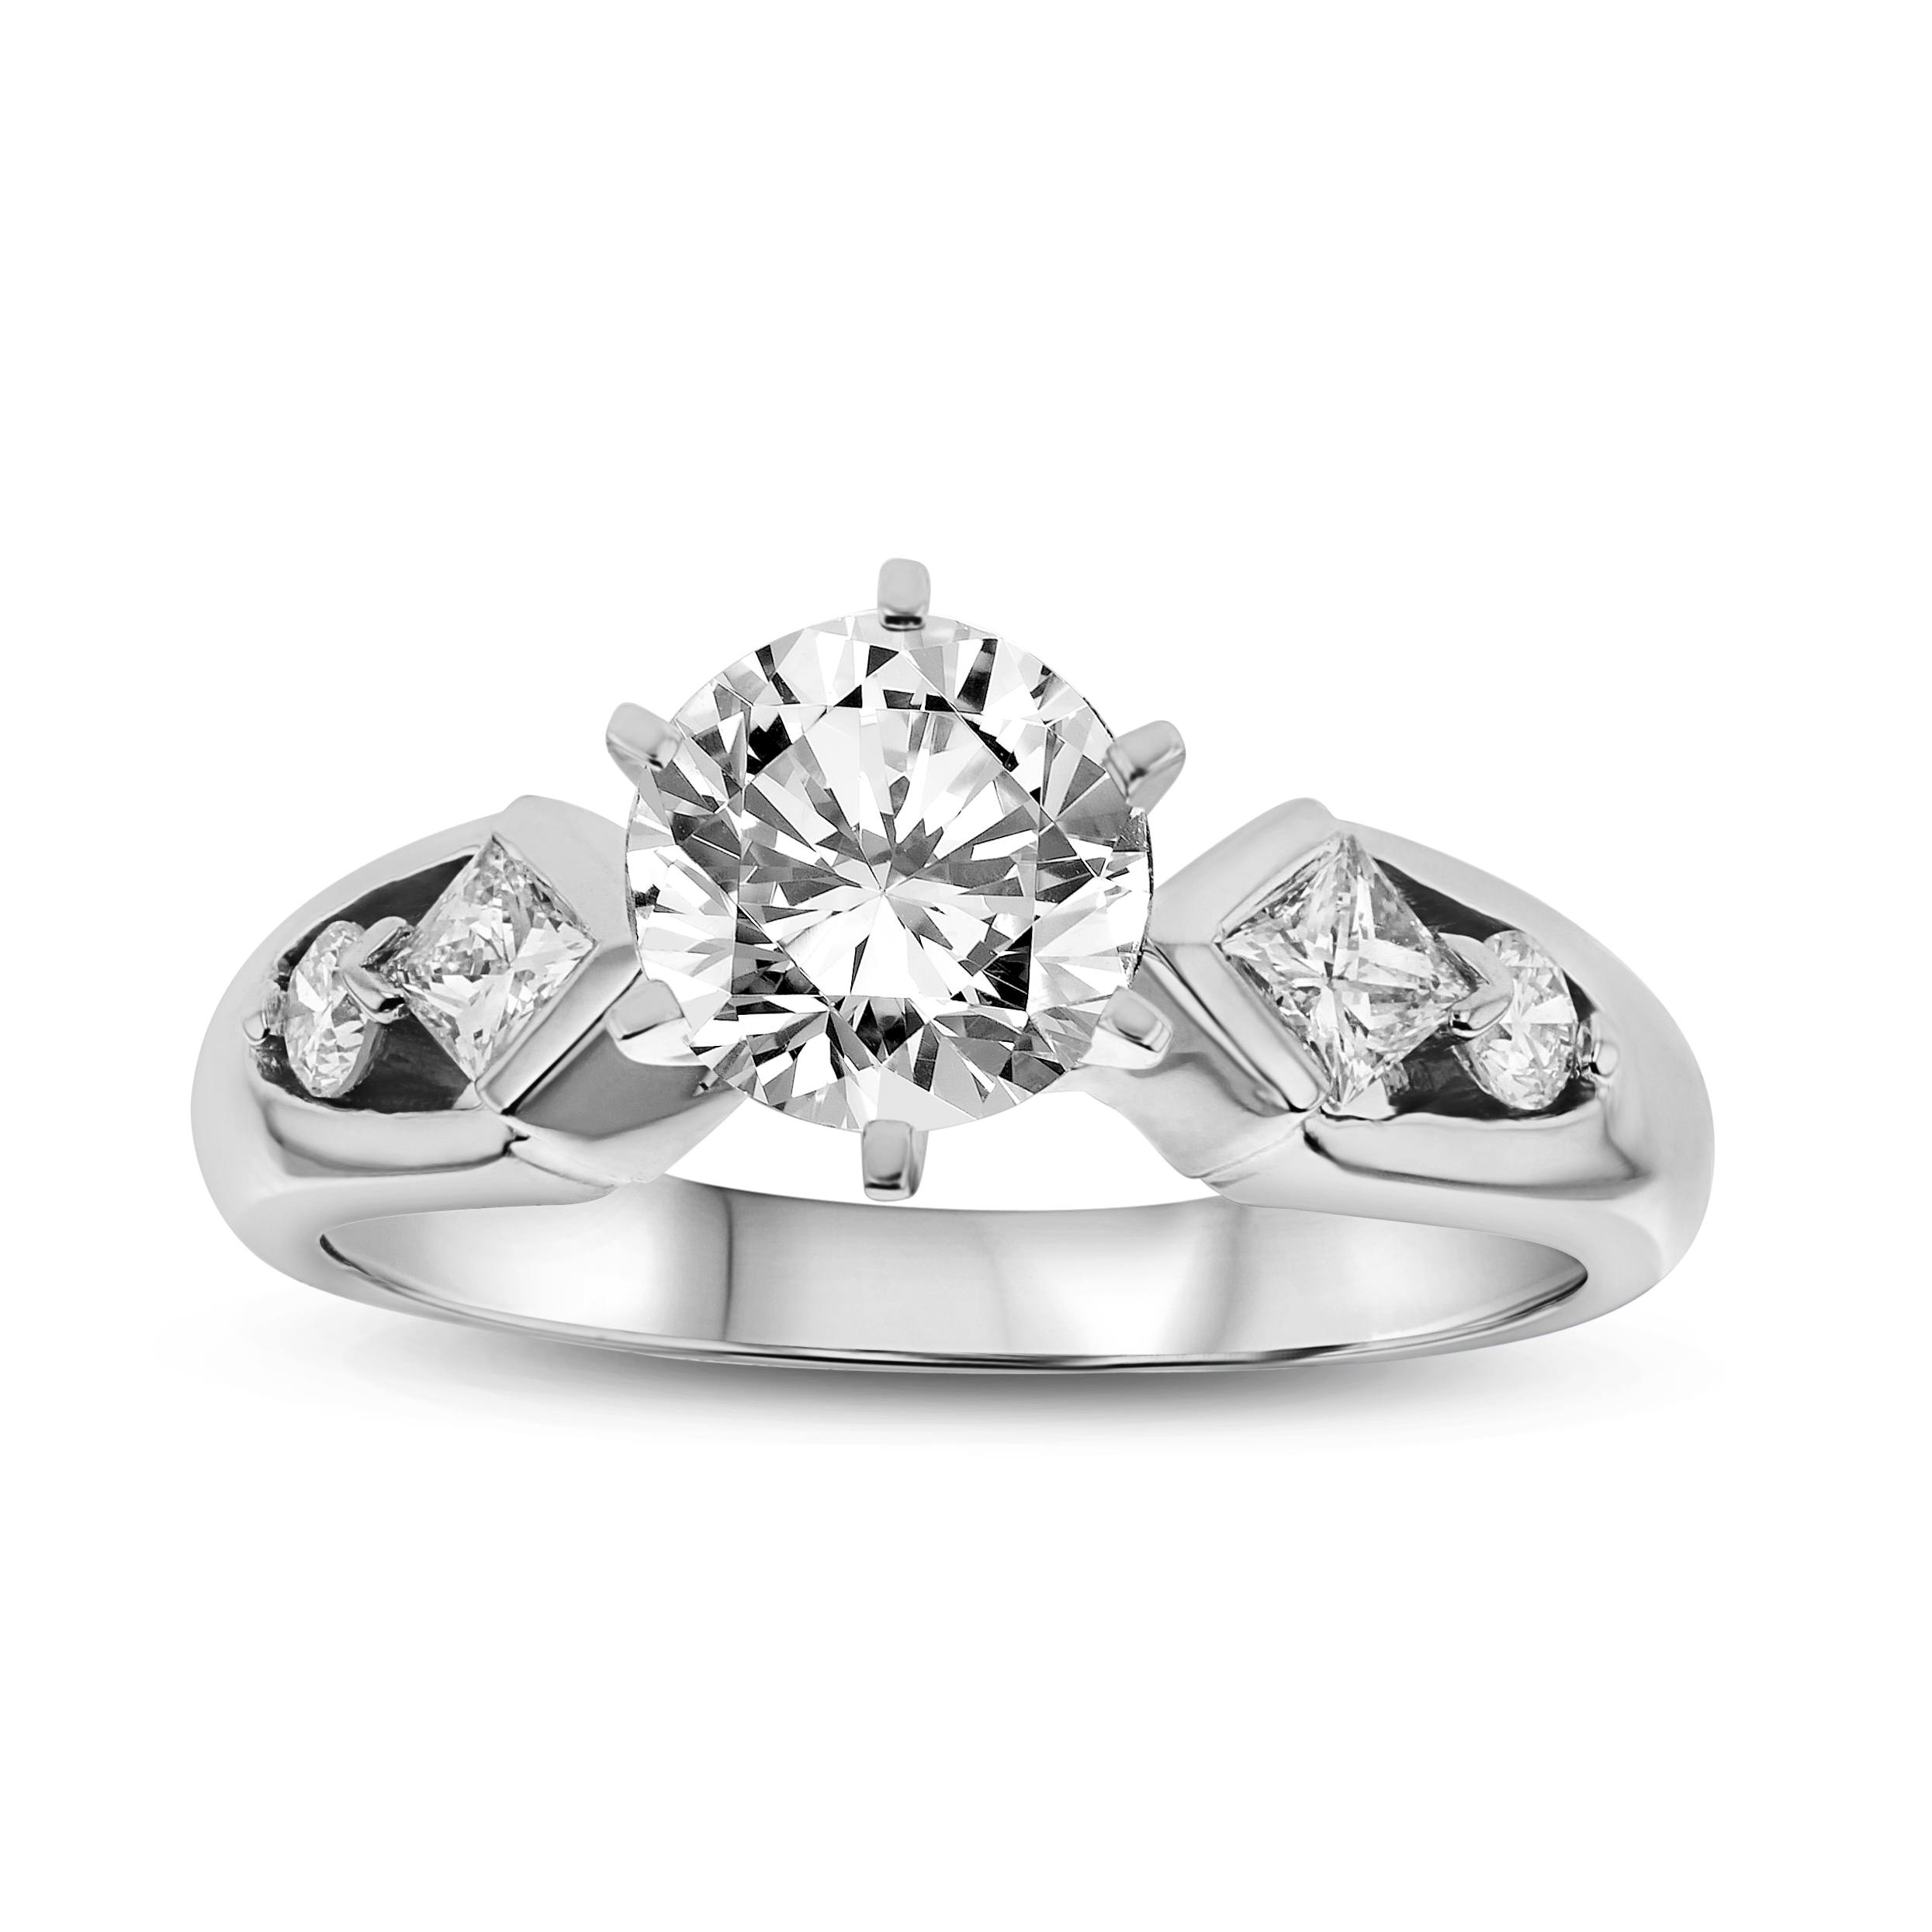 View 1.00ctw Diamond Engagement Ring in 14k Gold